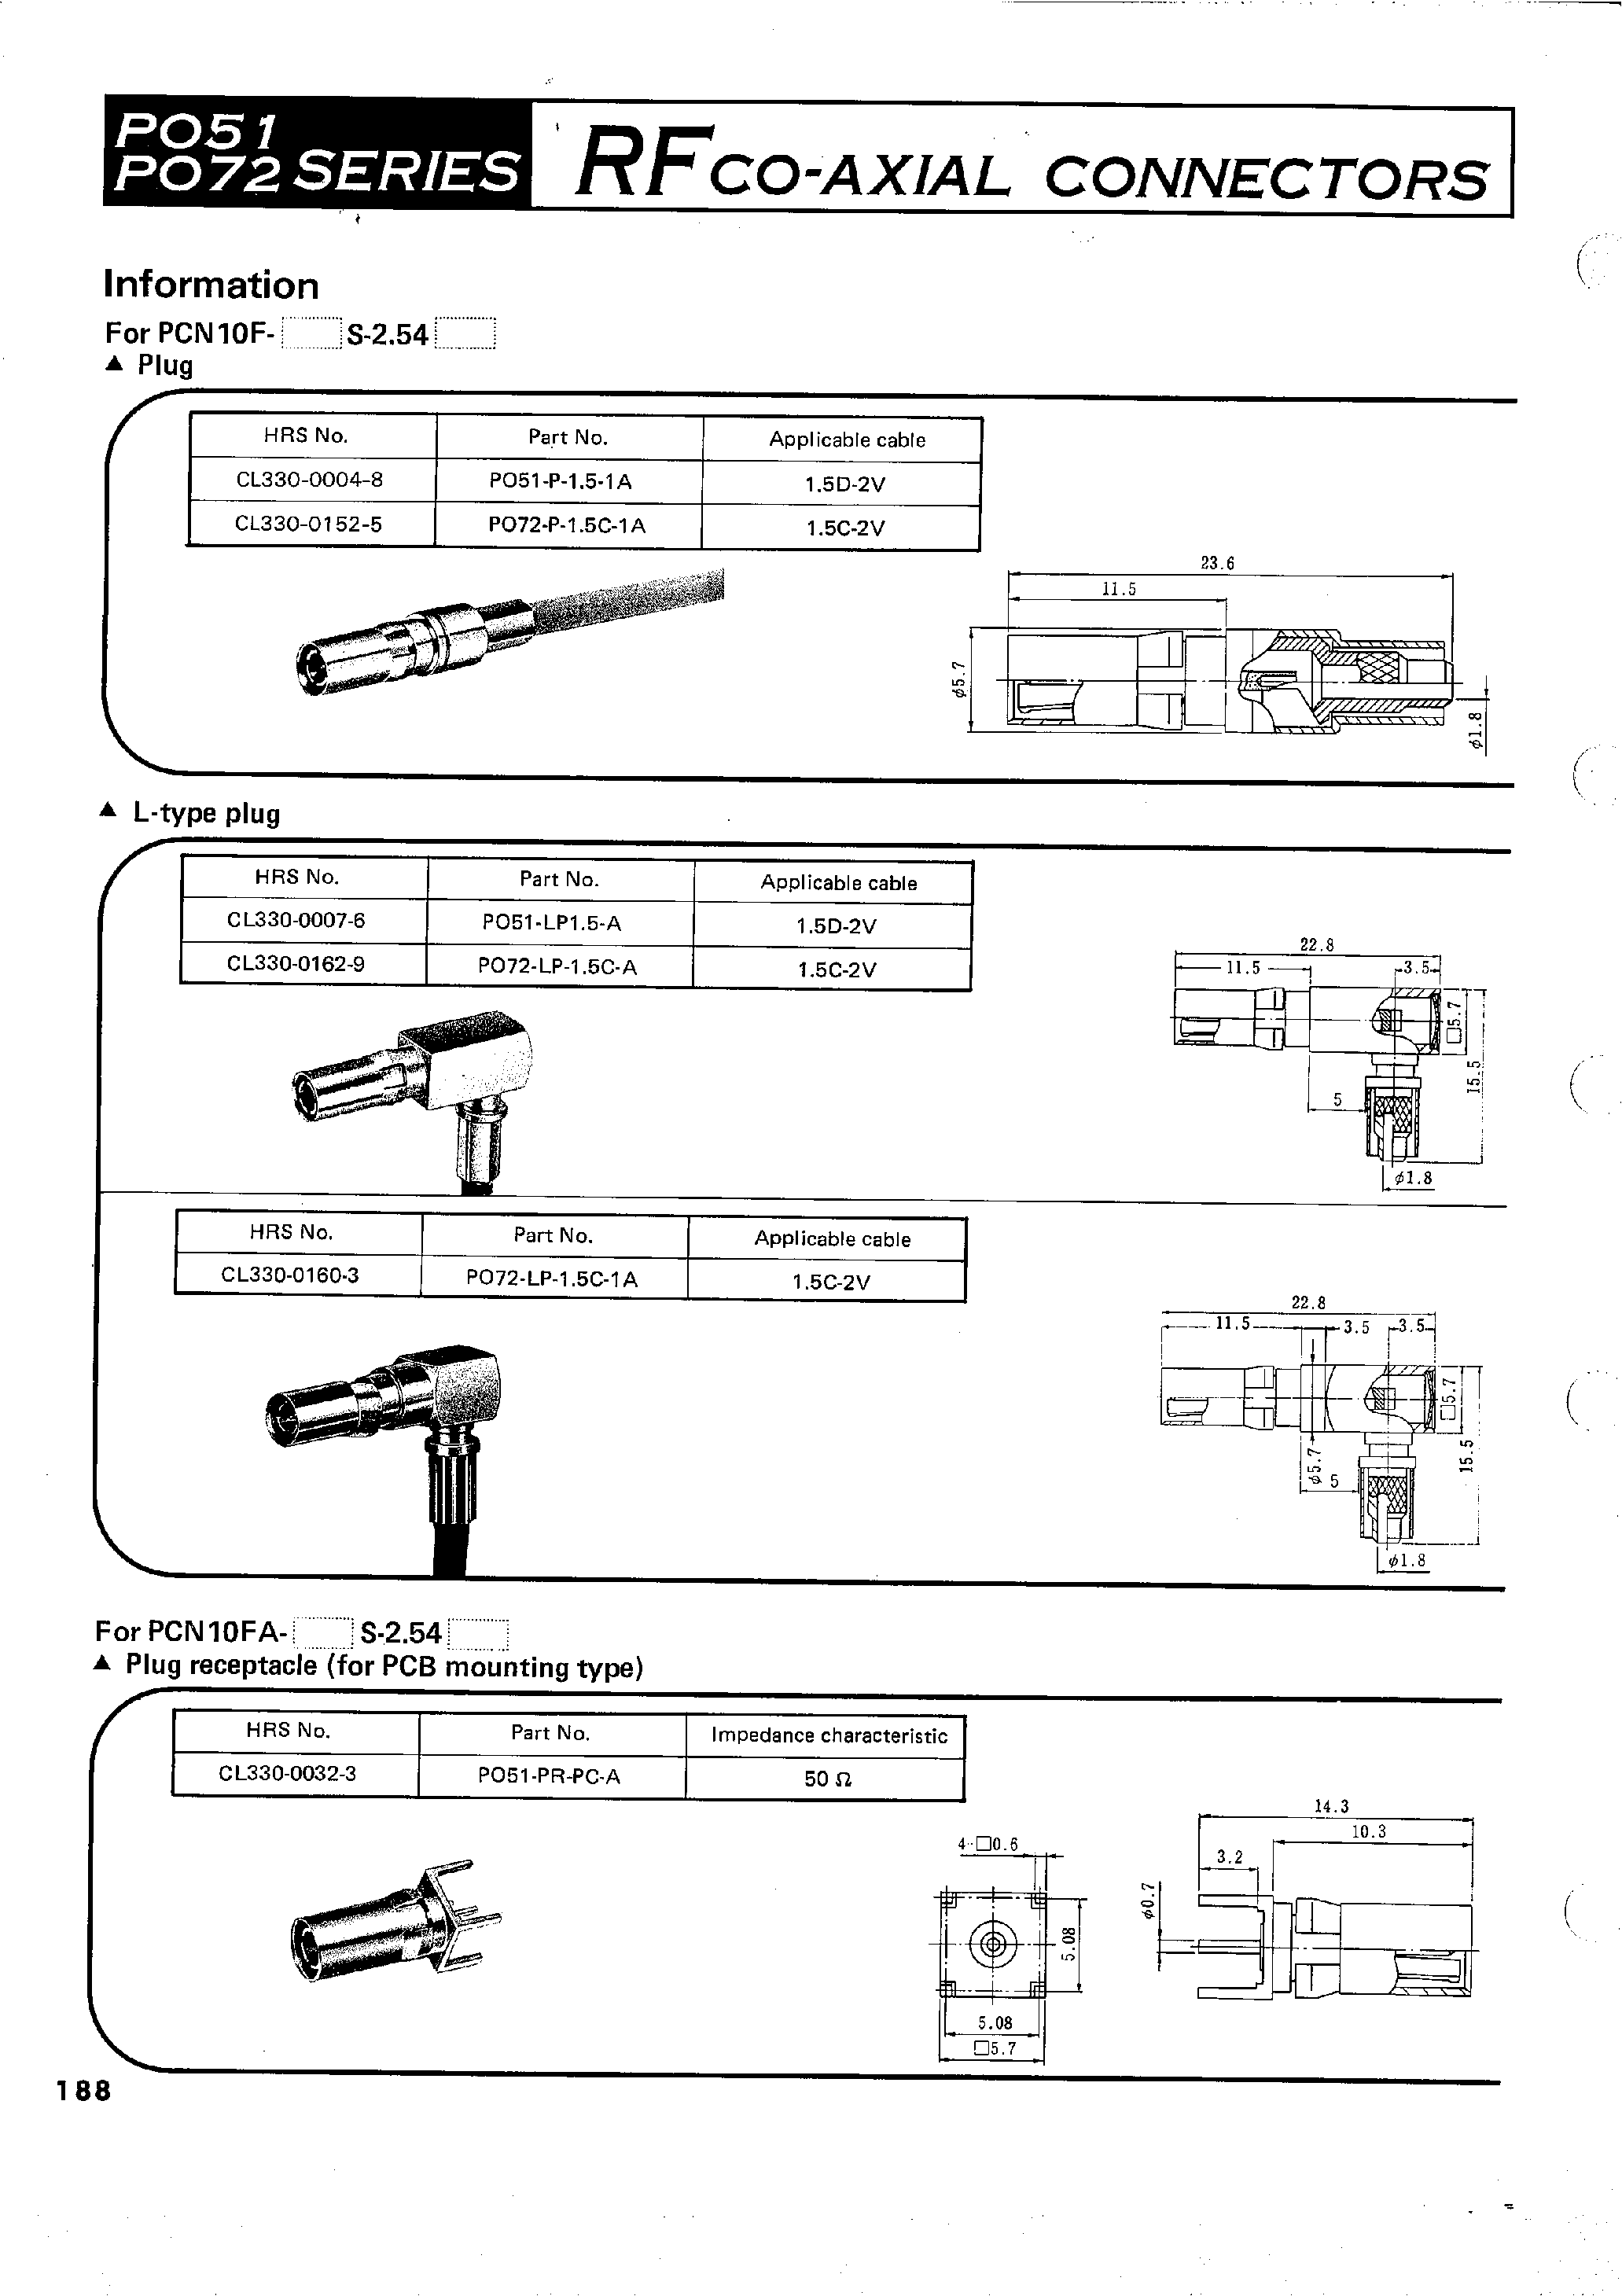 Datasheet PO51J-T-1S - RFCO-AXIAL CONNECTORS page 2